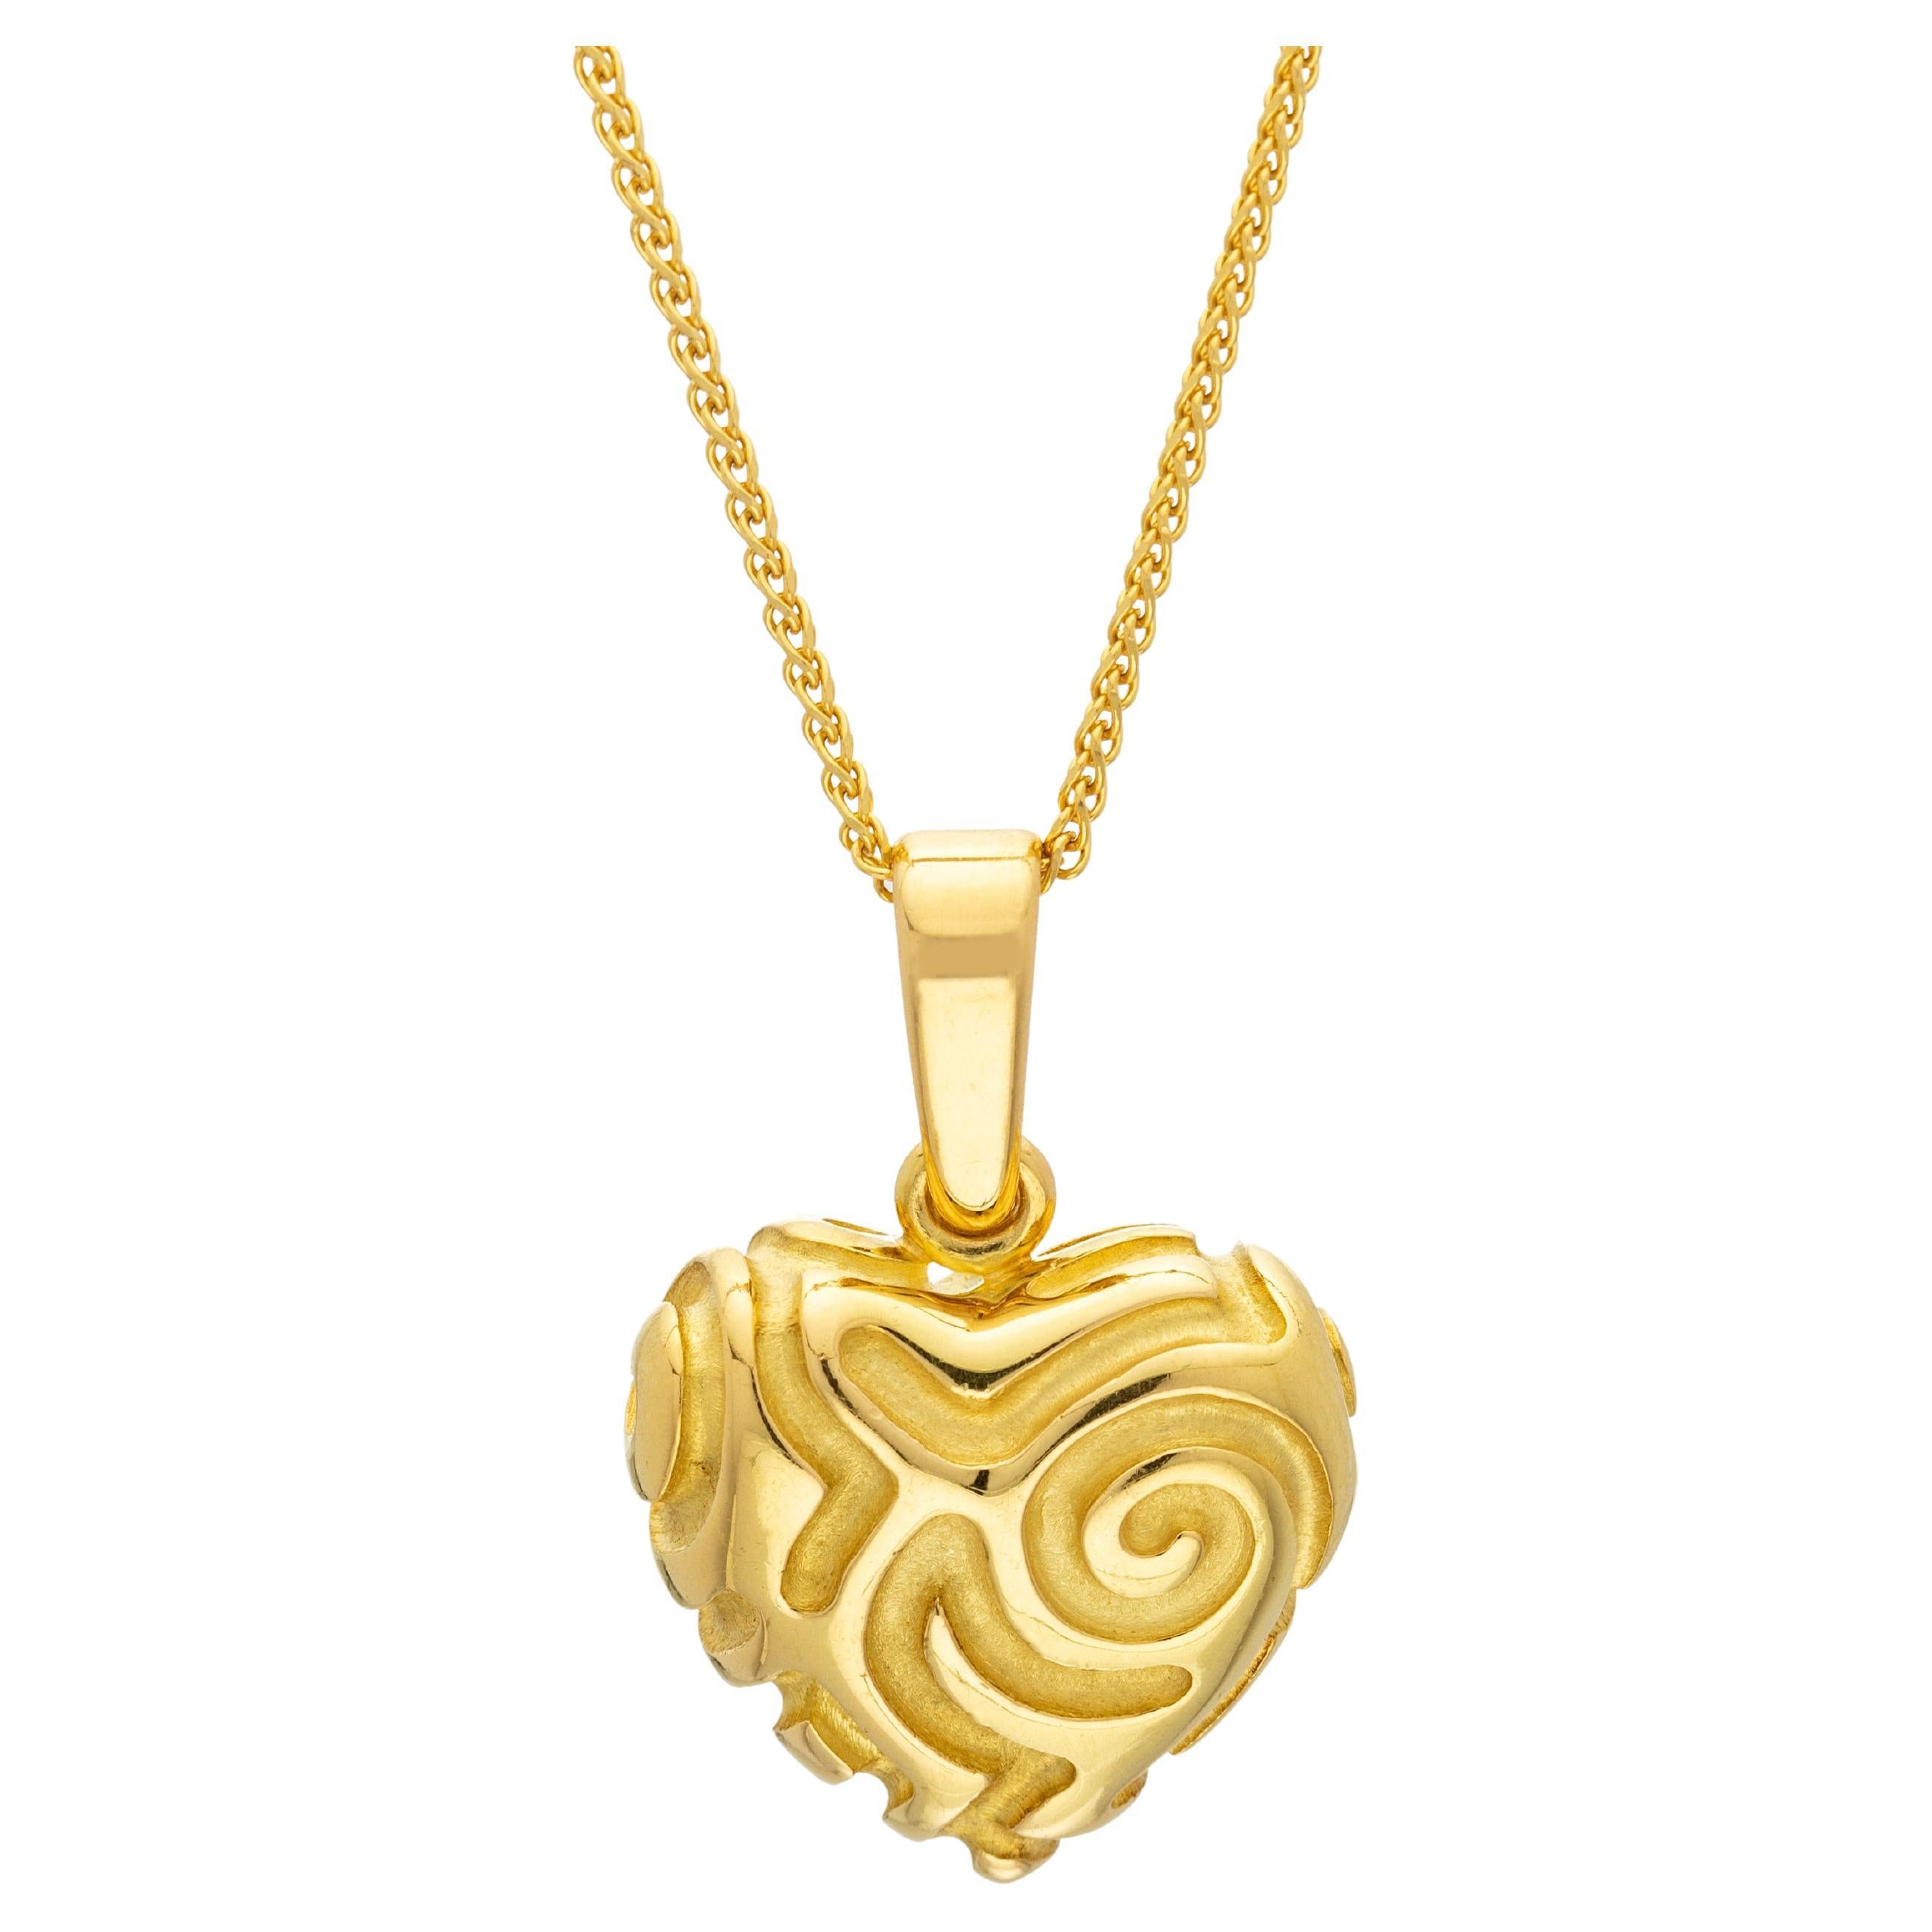 Small Carved Heart Pendant in 18k Gold, by Gloria Bass